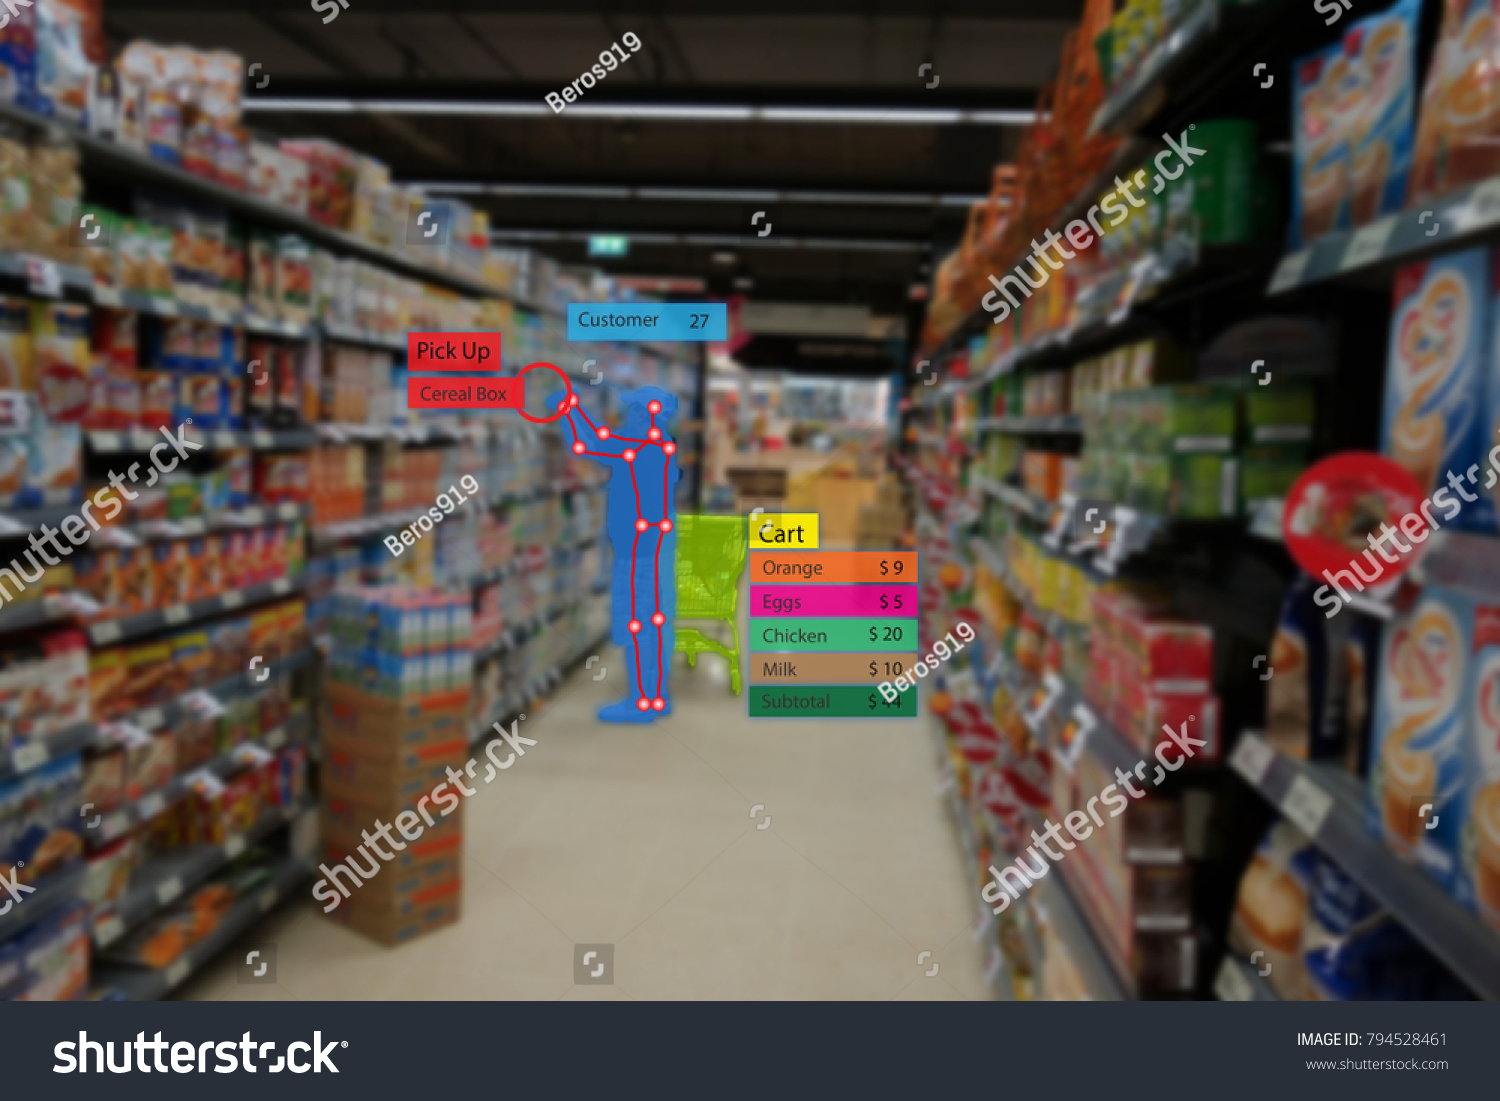 iot smart retail use computer vision, sensor fusion and deep learning concept, automatically detects when products are taken from or returned to the shelves and keeps track of them in a virtual cart. #794528461